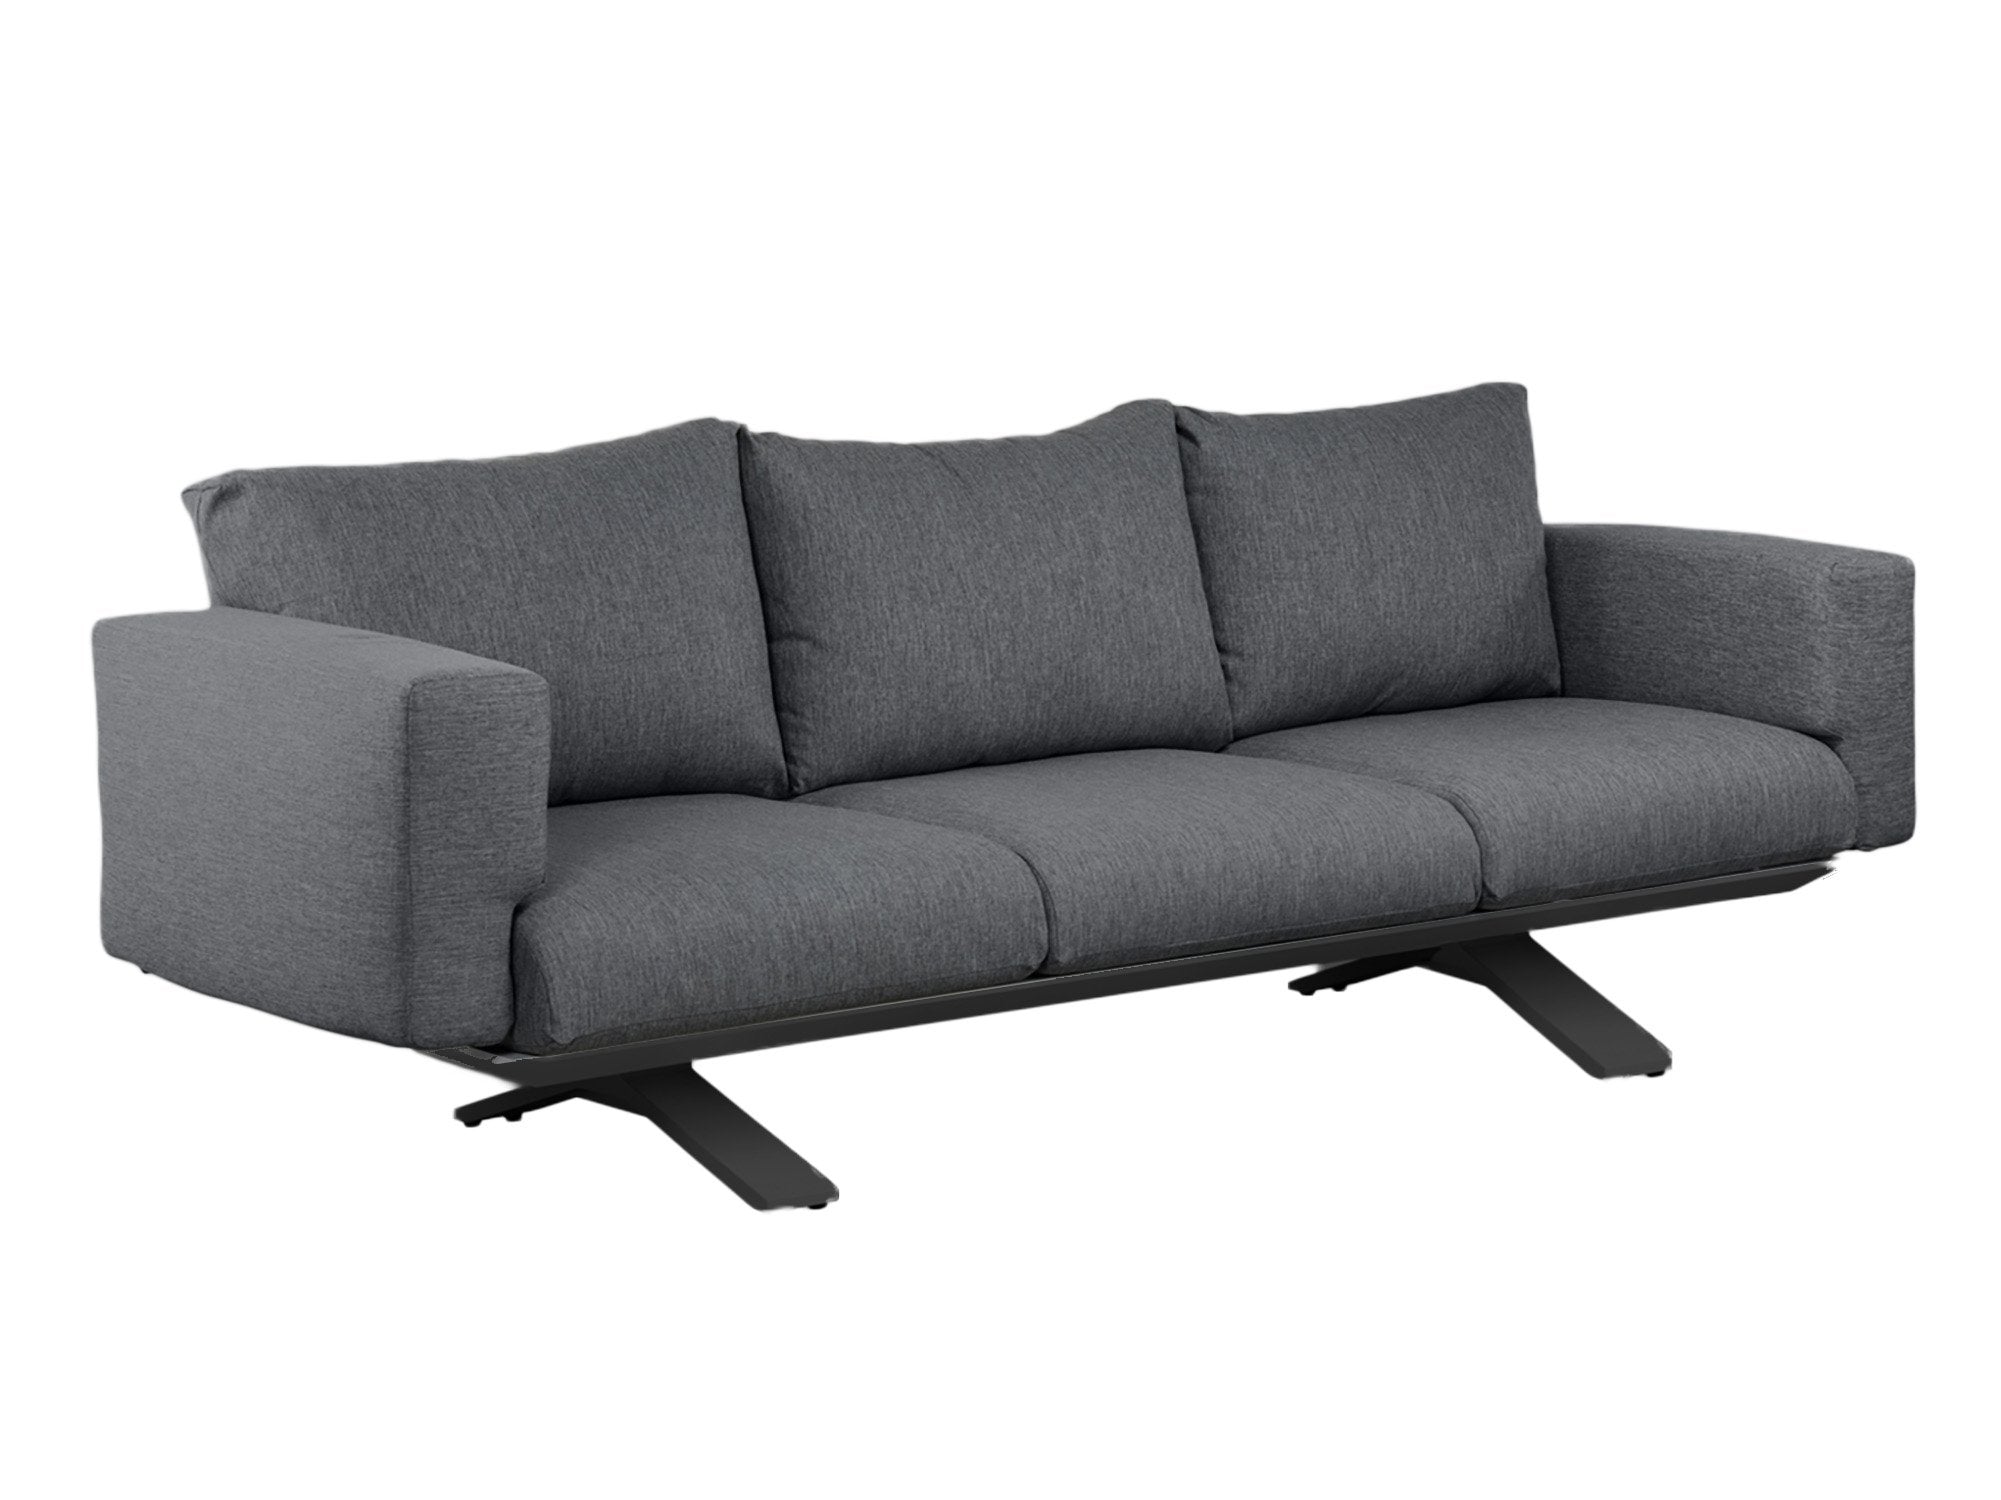 Stockholm Outdoor 3-Seater Sofa